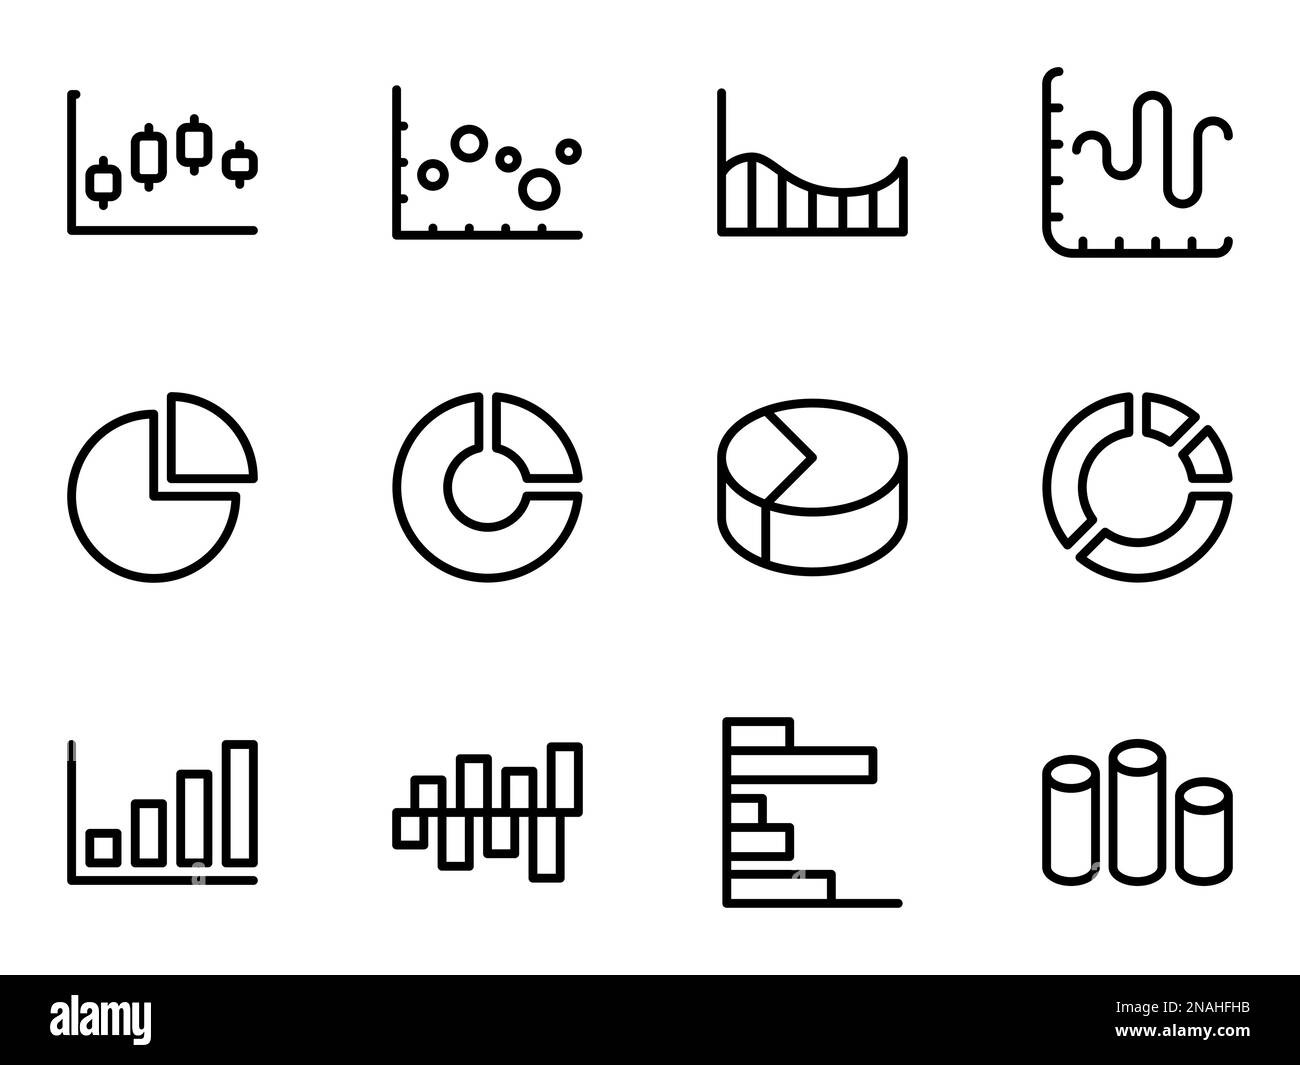 Simple vector icons. Flat illustration on a theme graph Stock Vector